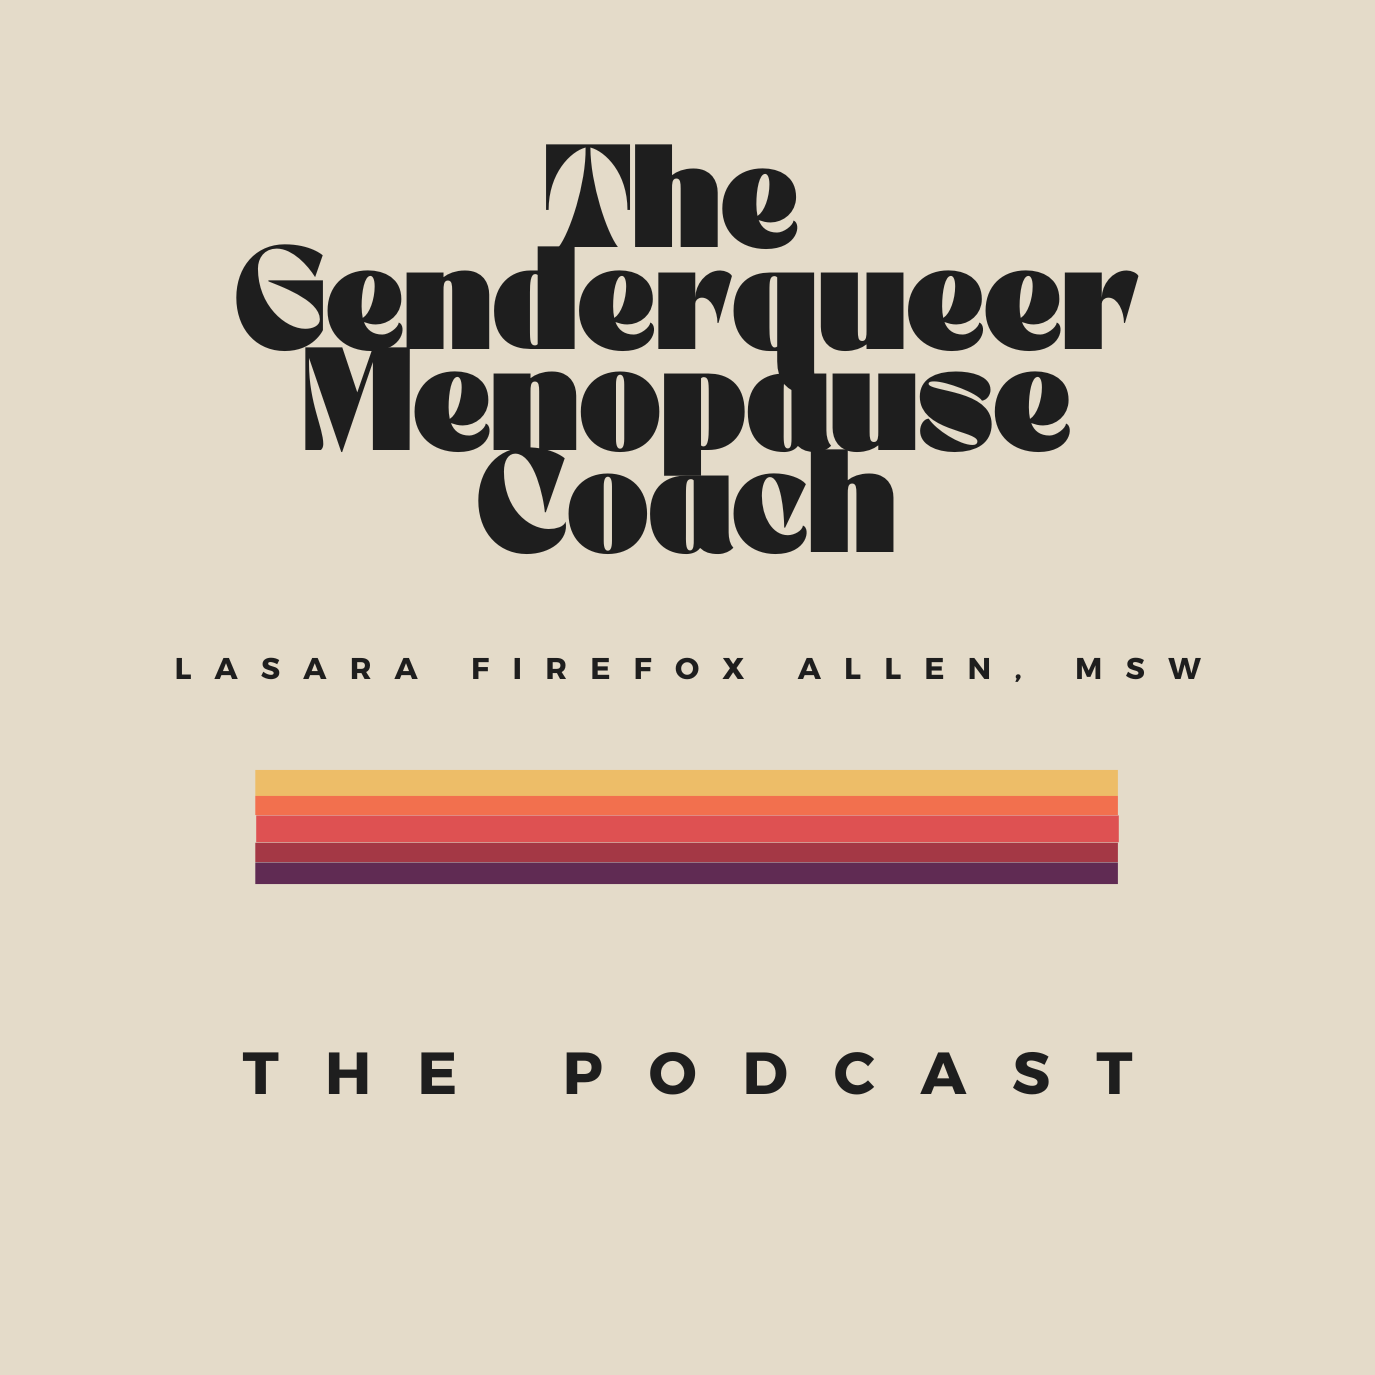 the genderqueer menopause coach podcast logo